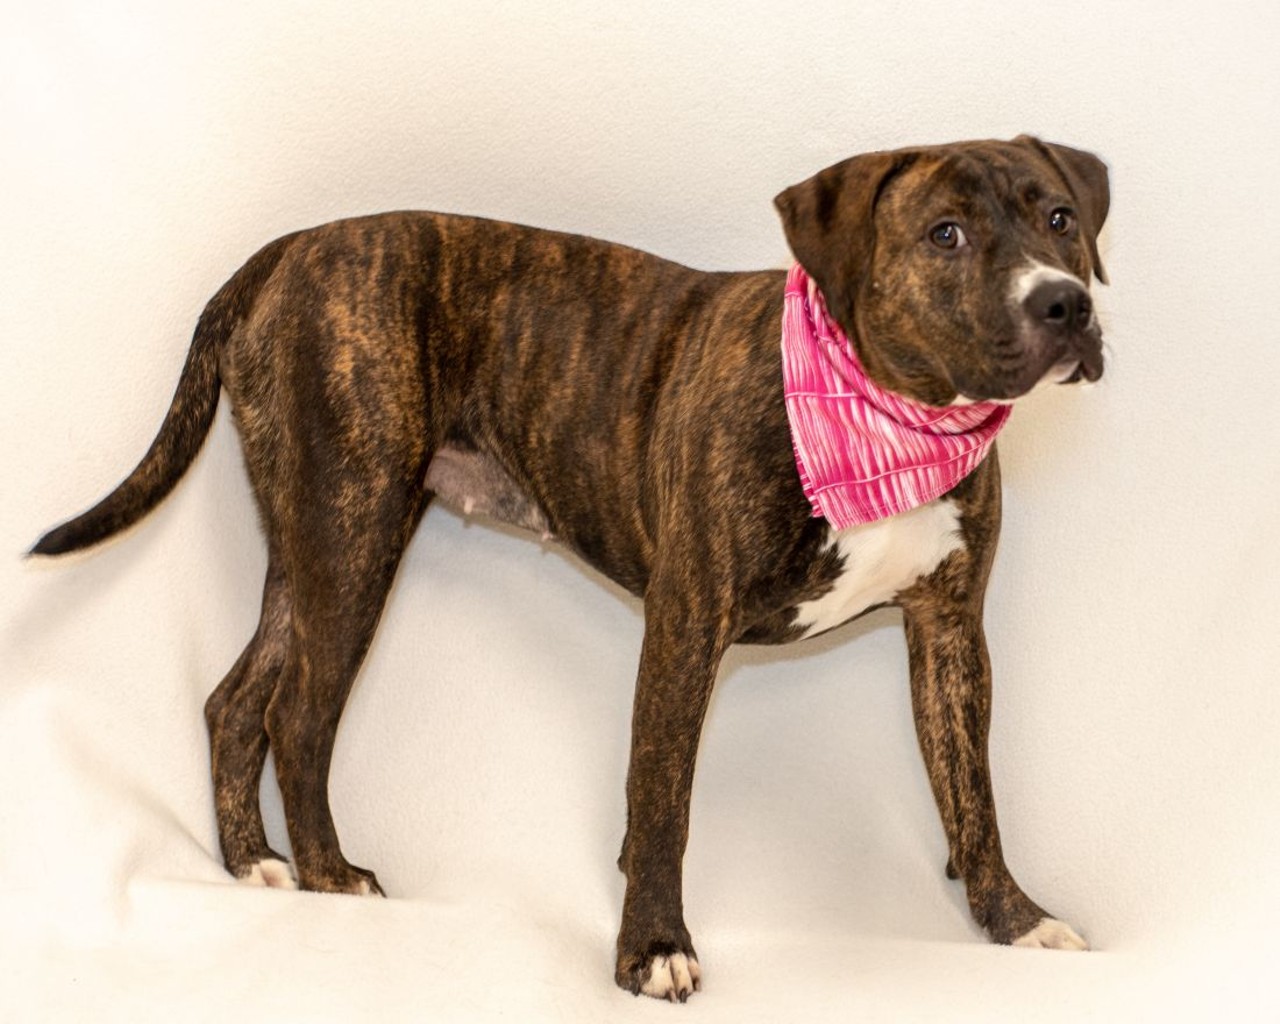 NAME: Madison 
GENDER: Female 
BREED: Pit Bull 
AGE: 1 year, 7 months 
WEIGHT: 51 pounds
SPECIAL CONSIDERATIONS: Madison prefers a home with older or no children.
REASON I CAME TO MHS: Agency transfer 
LOCATION: Berman Center for Animal Care in Detroit 
ID NUMBER: 869557 